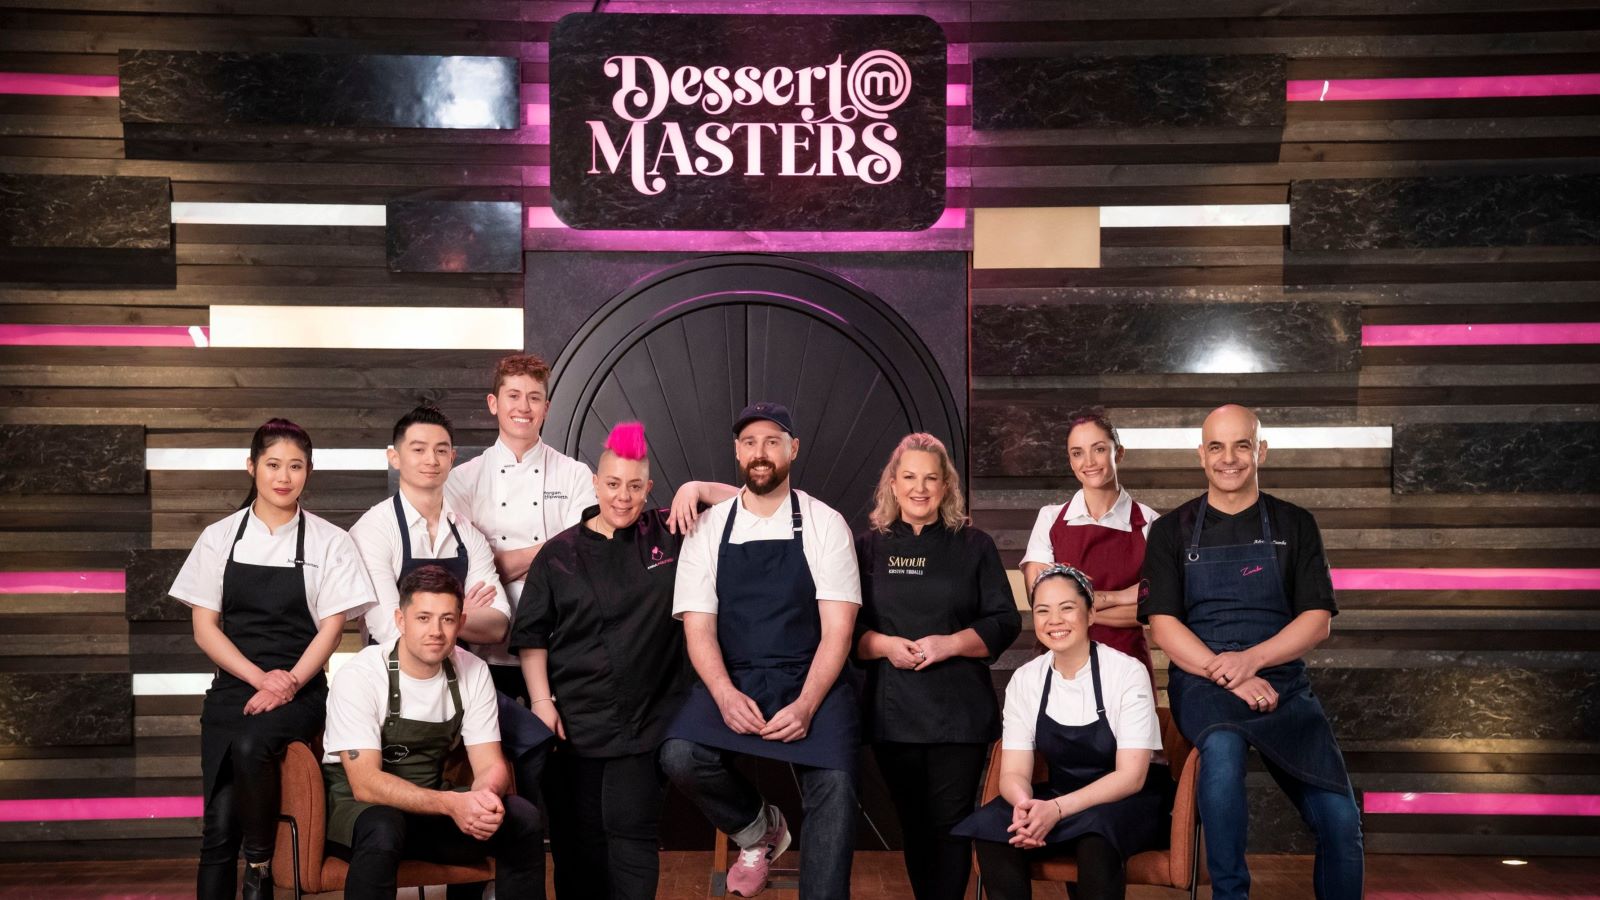 How to Watch MasterChef Dessert Masters Online Free from Anywhere